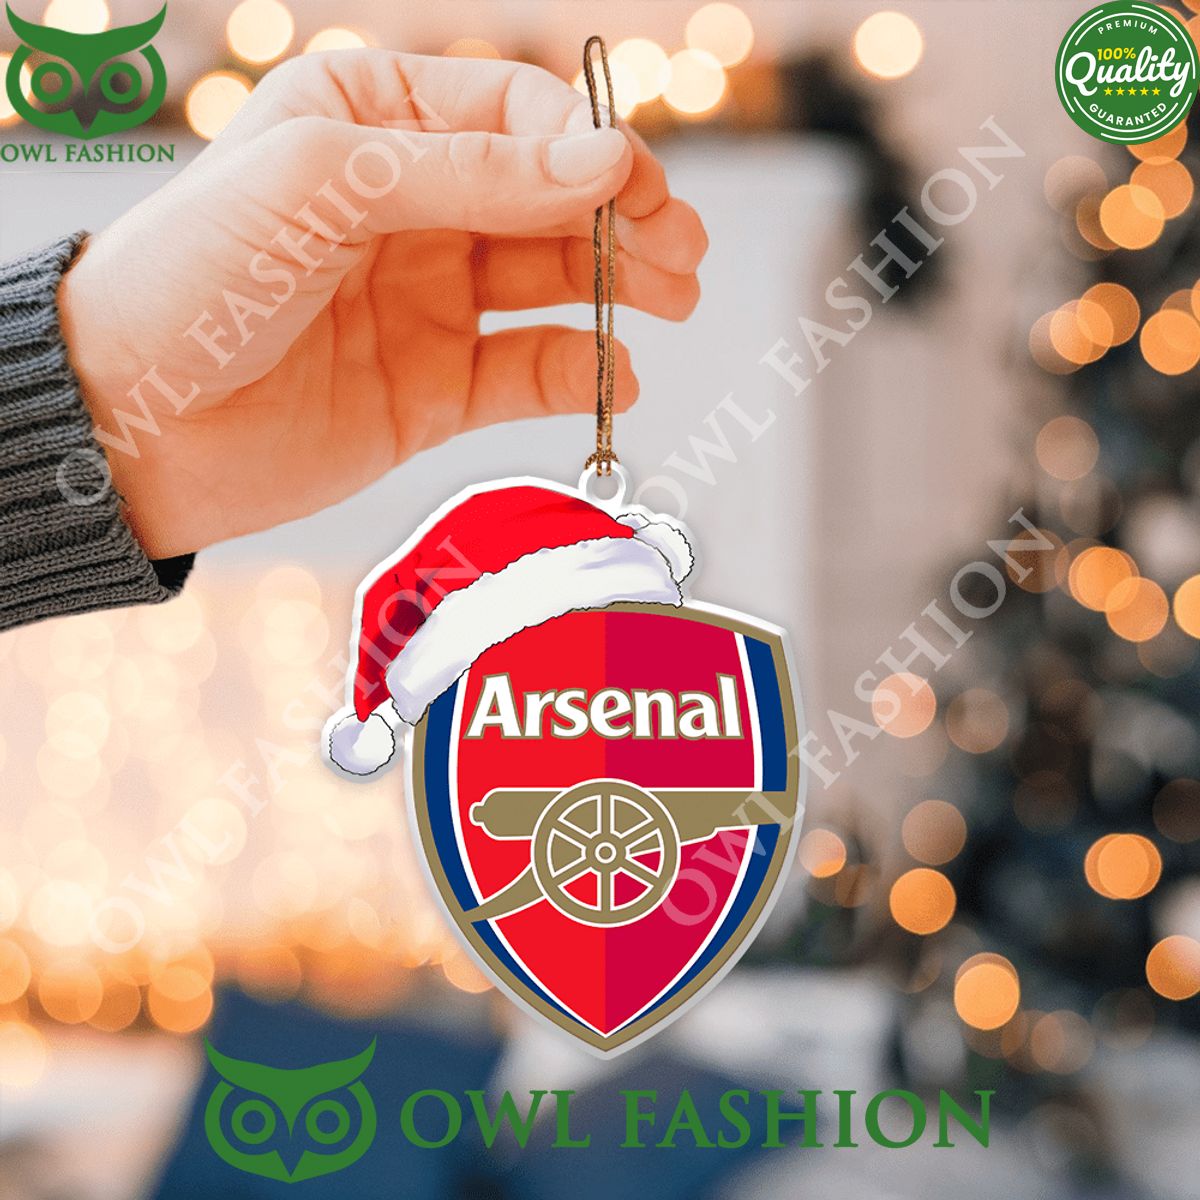 Arsenal Logo 2 Side Printed Ornament Eye soothing picture dear